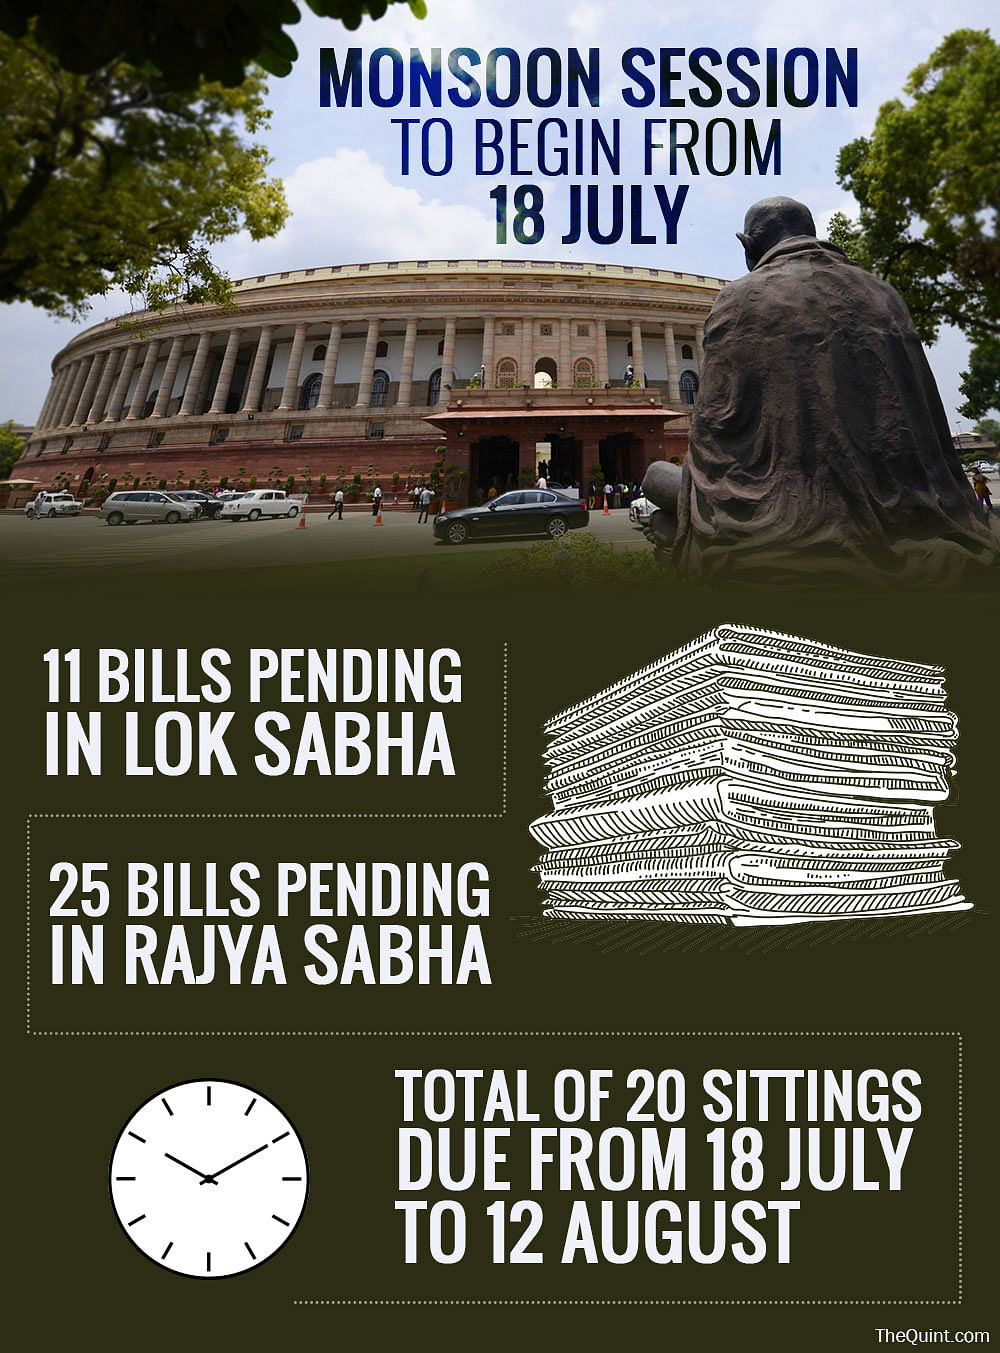 With 15 bills and 20  sittings will the monsoon  session  allow the NDA govt to accomplish its legislative agenda?